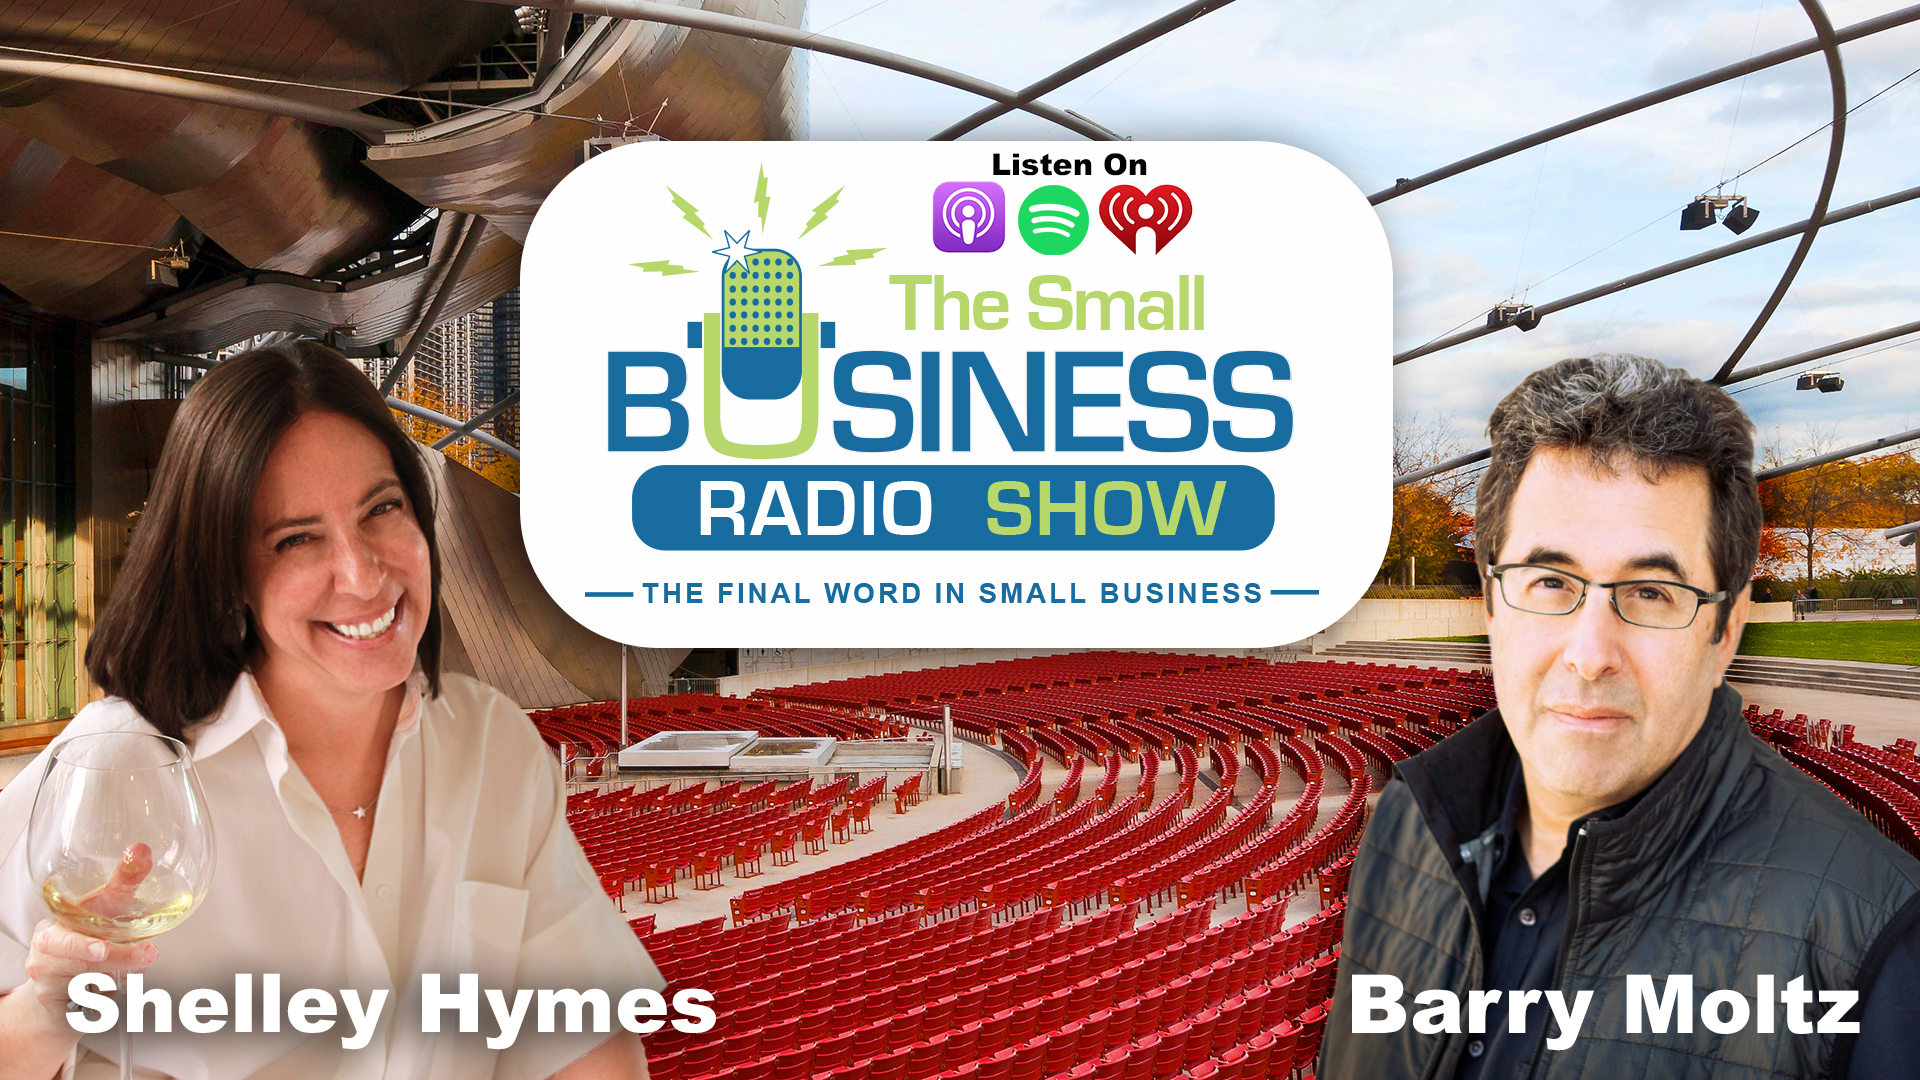 Shelley Hymes on The Small Business Radio Show